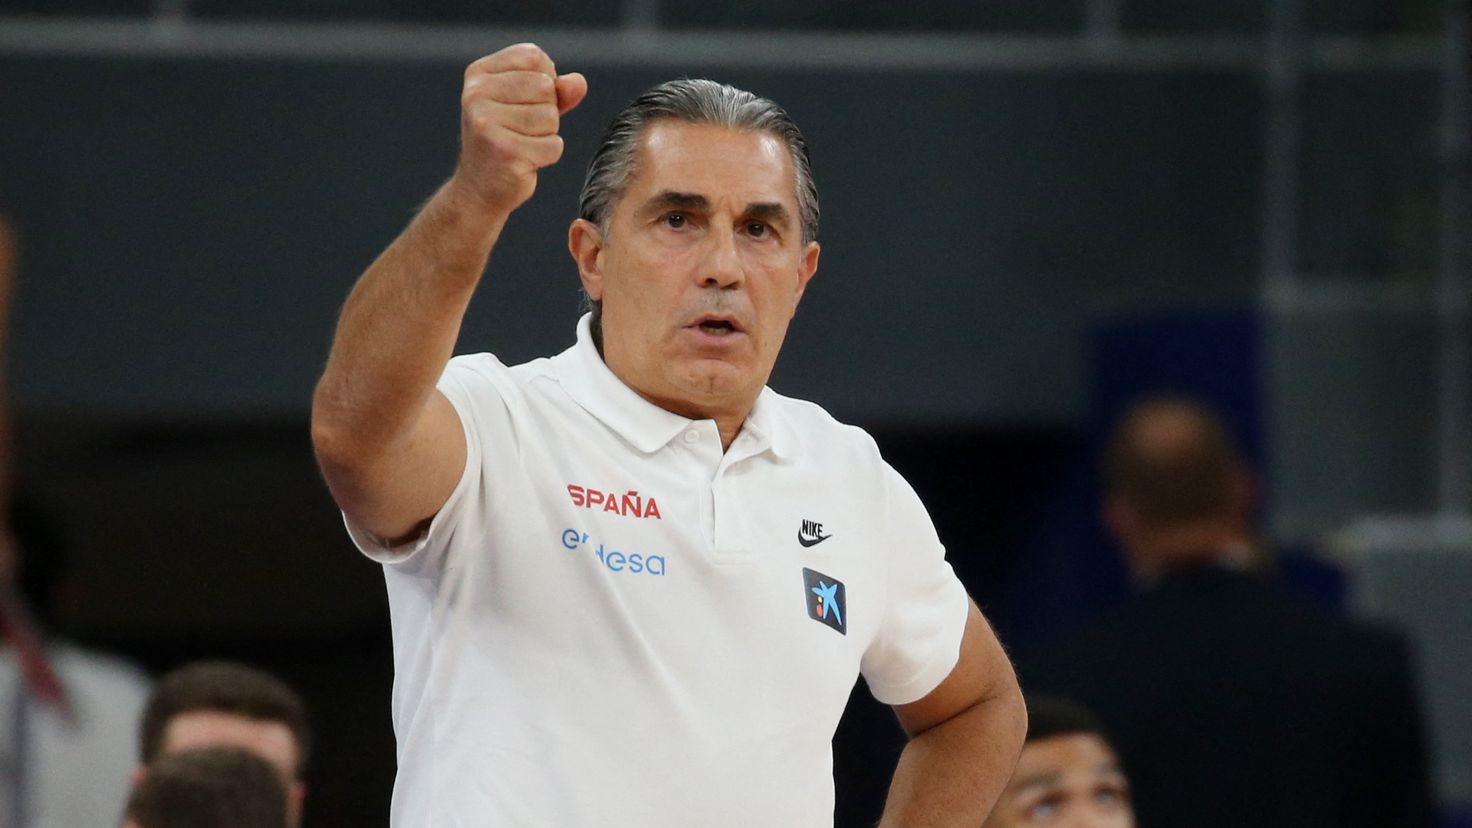 Scariolo is one step away: Rajakovic will coach Toronto
